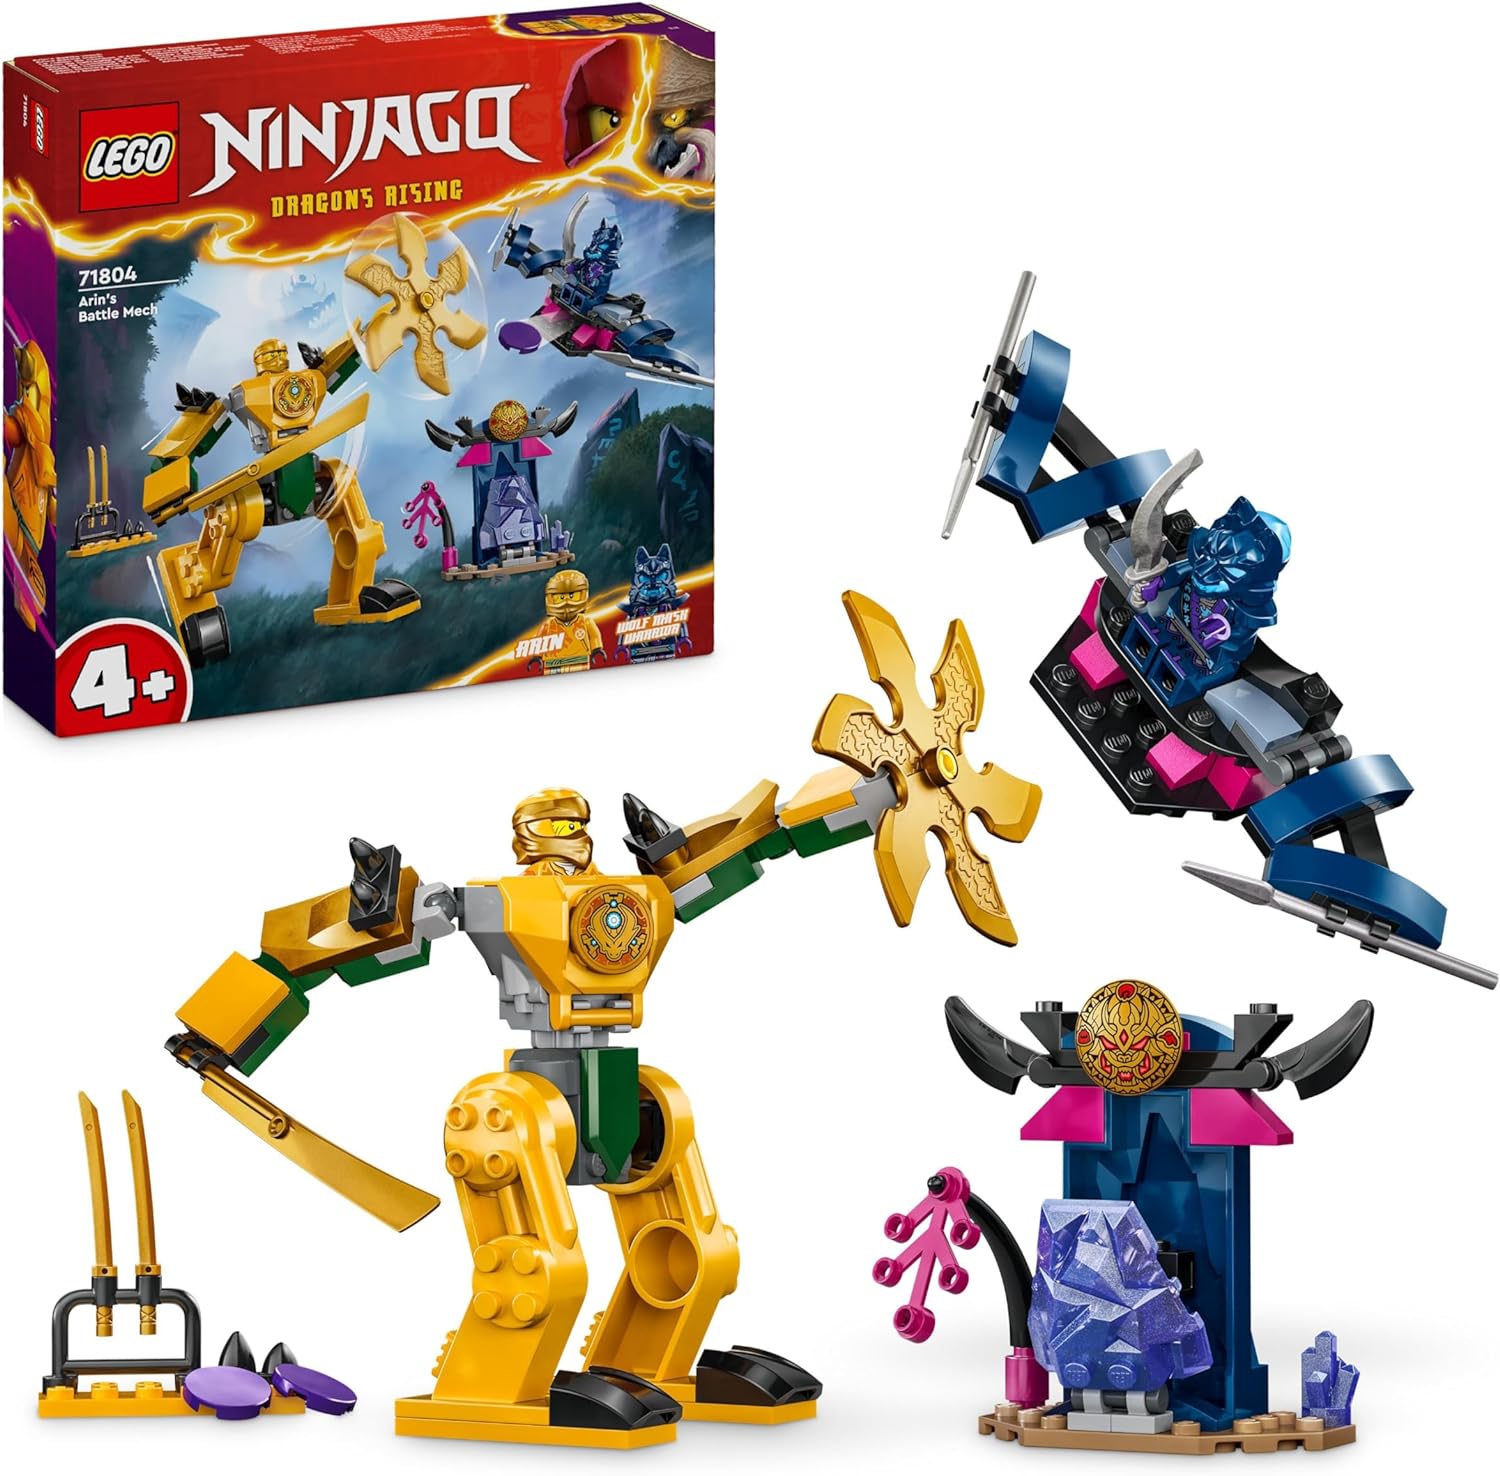 LEGO Ninjago Arins Battle Mech, Ninja Toy for Children from 4 Years with Figures Including Arin with Mini Katana, Action Figures & Mechs, Small Gift for Boys and Girls 71804